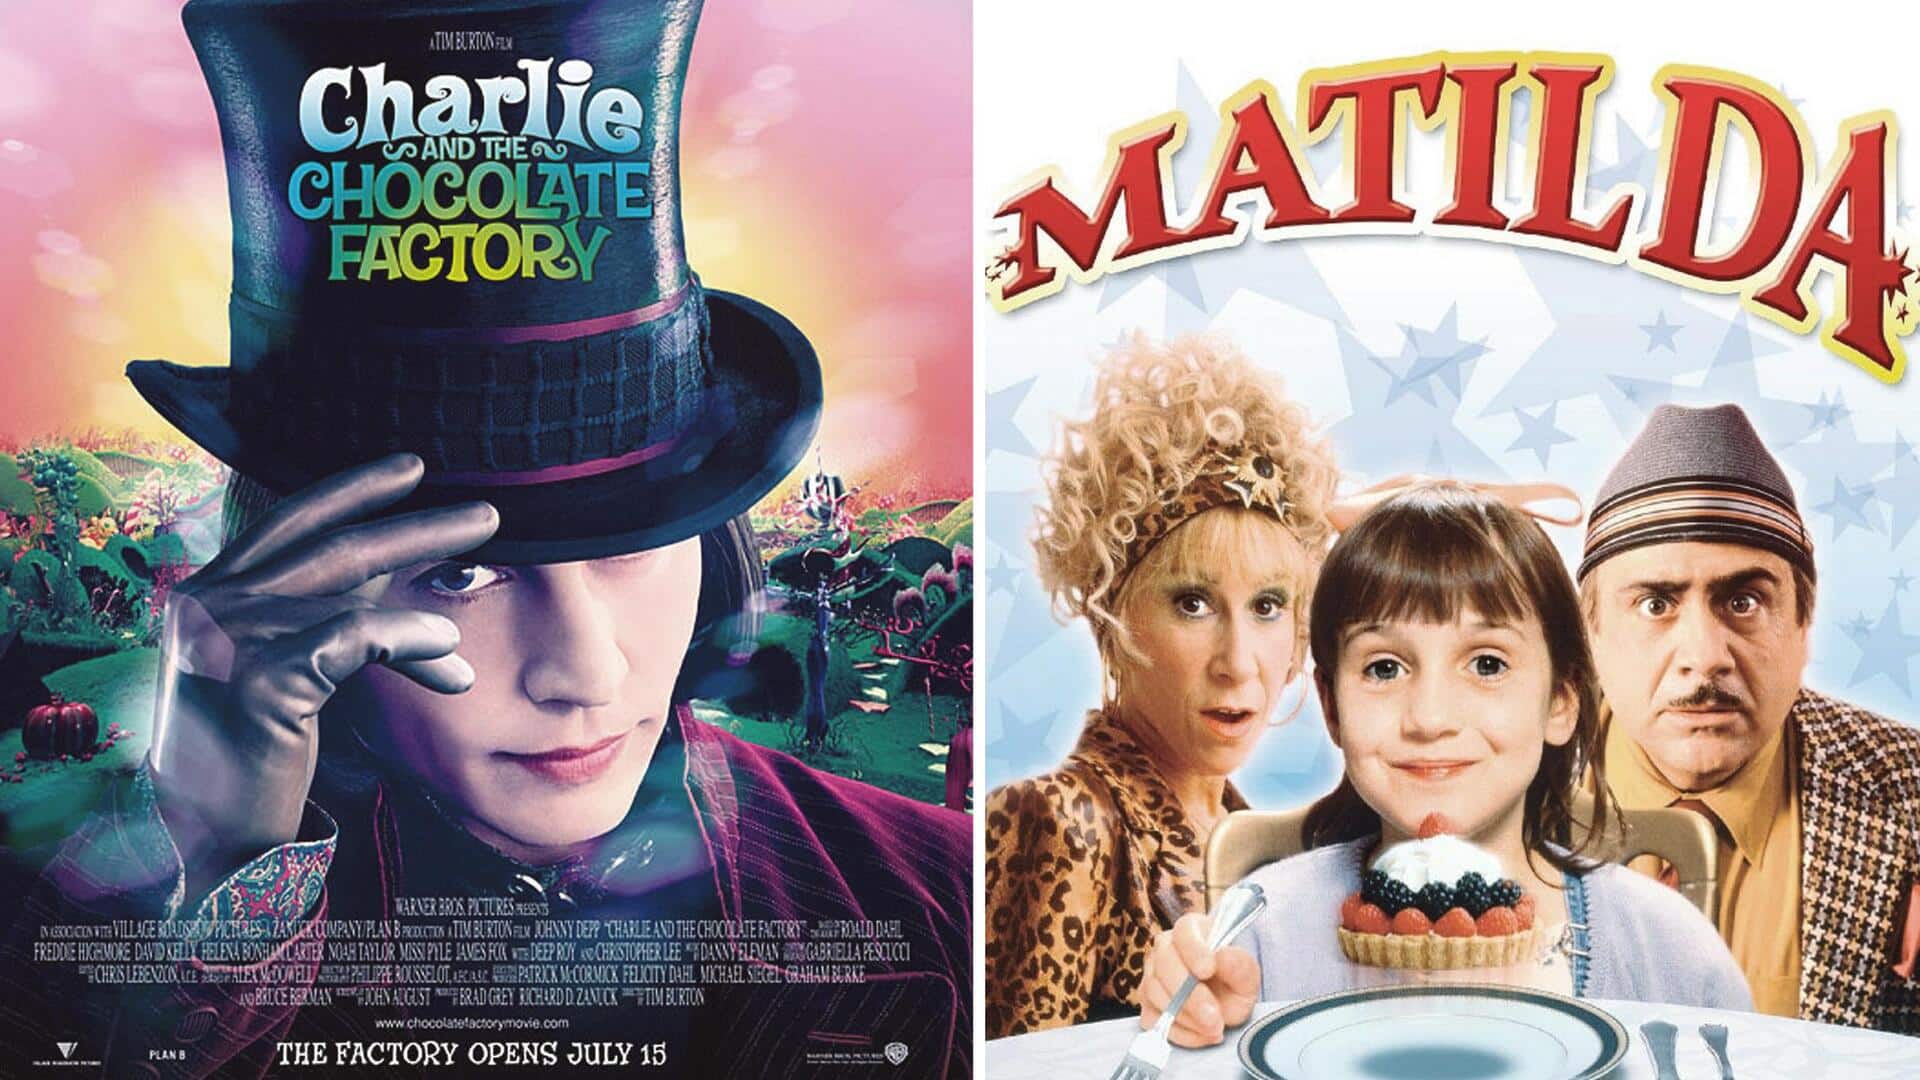 Hollywood films where children played central roles